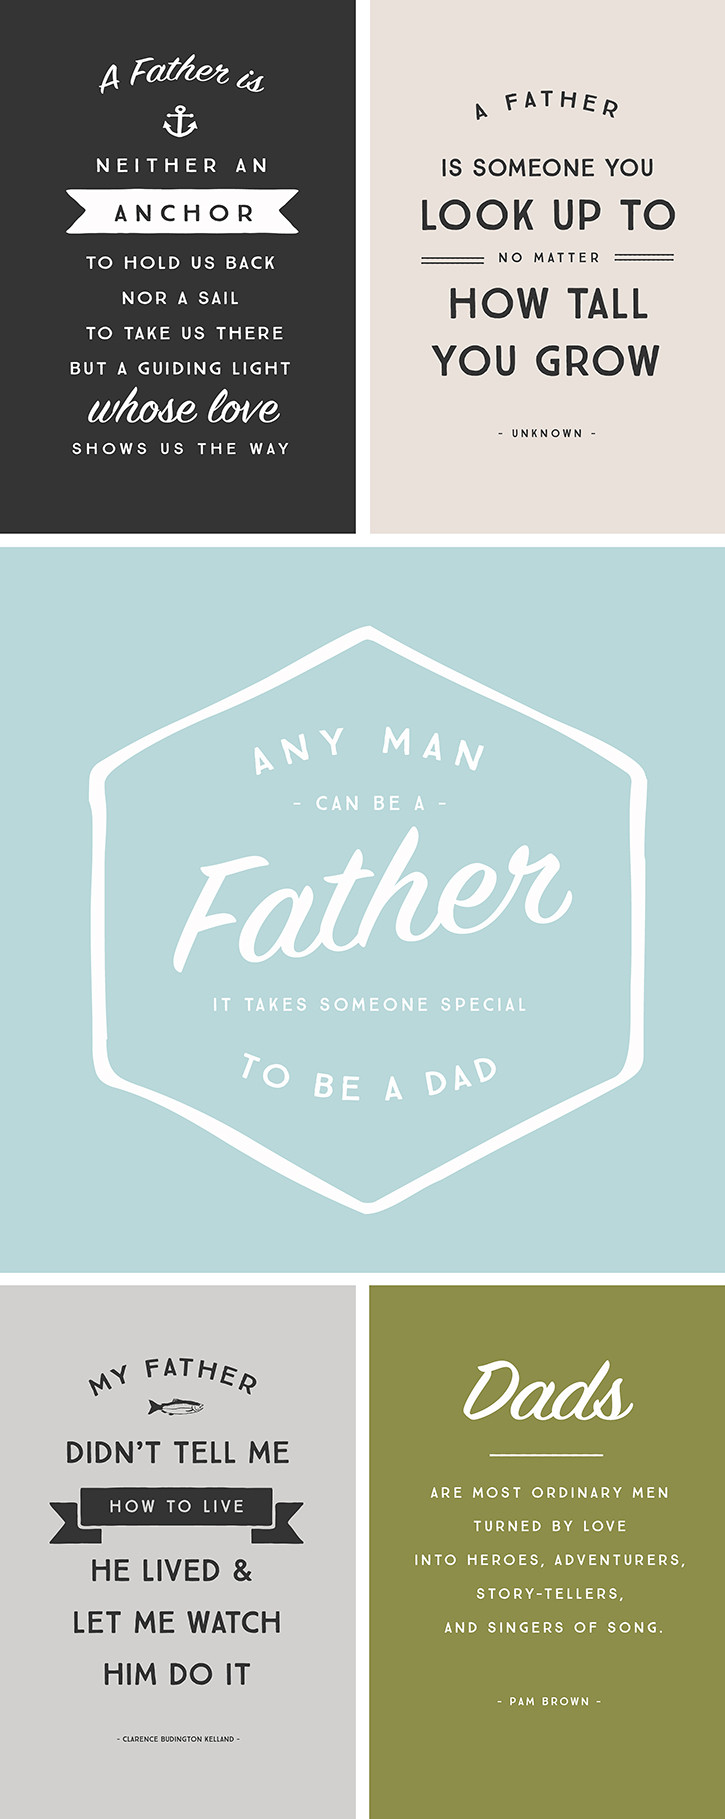 Quotes Fathers Day
 5 Inspirational Quotes for Father s Day